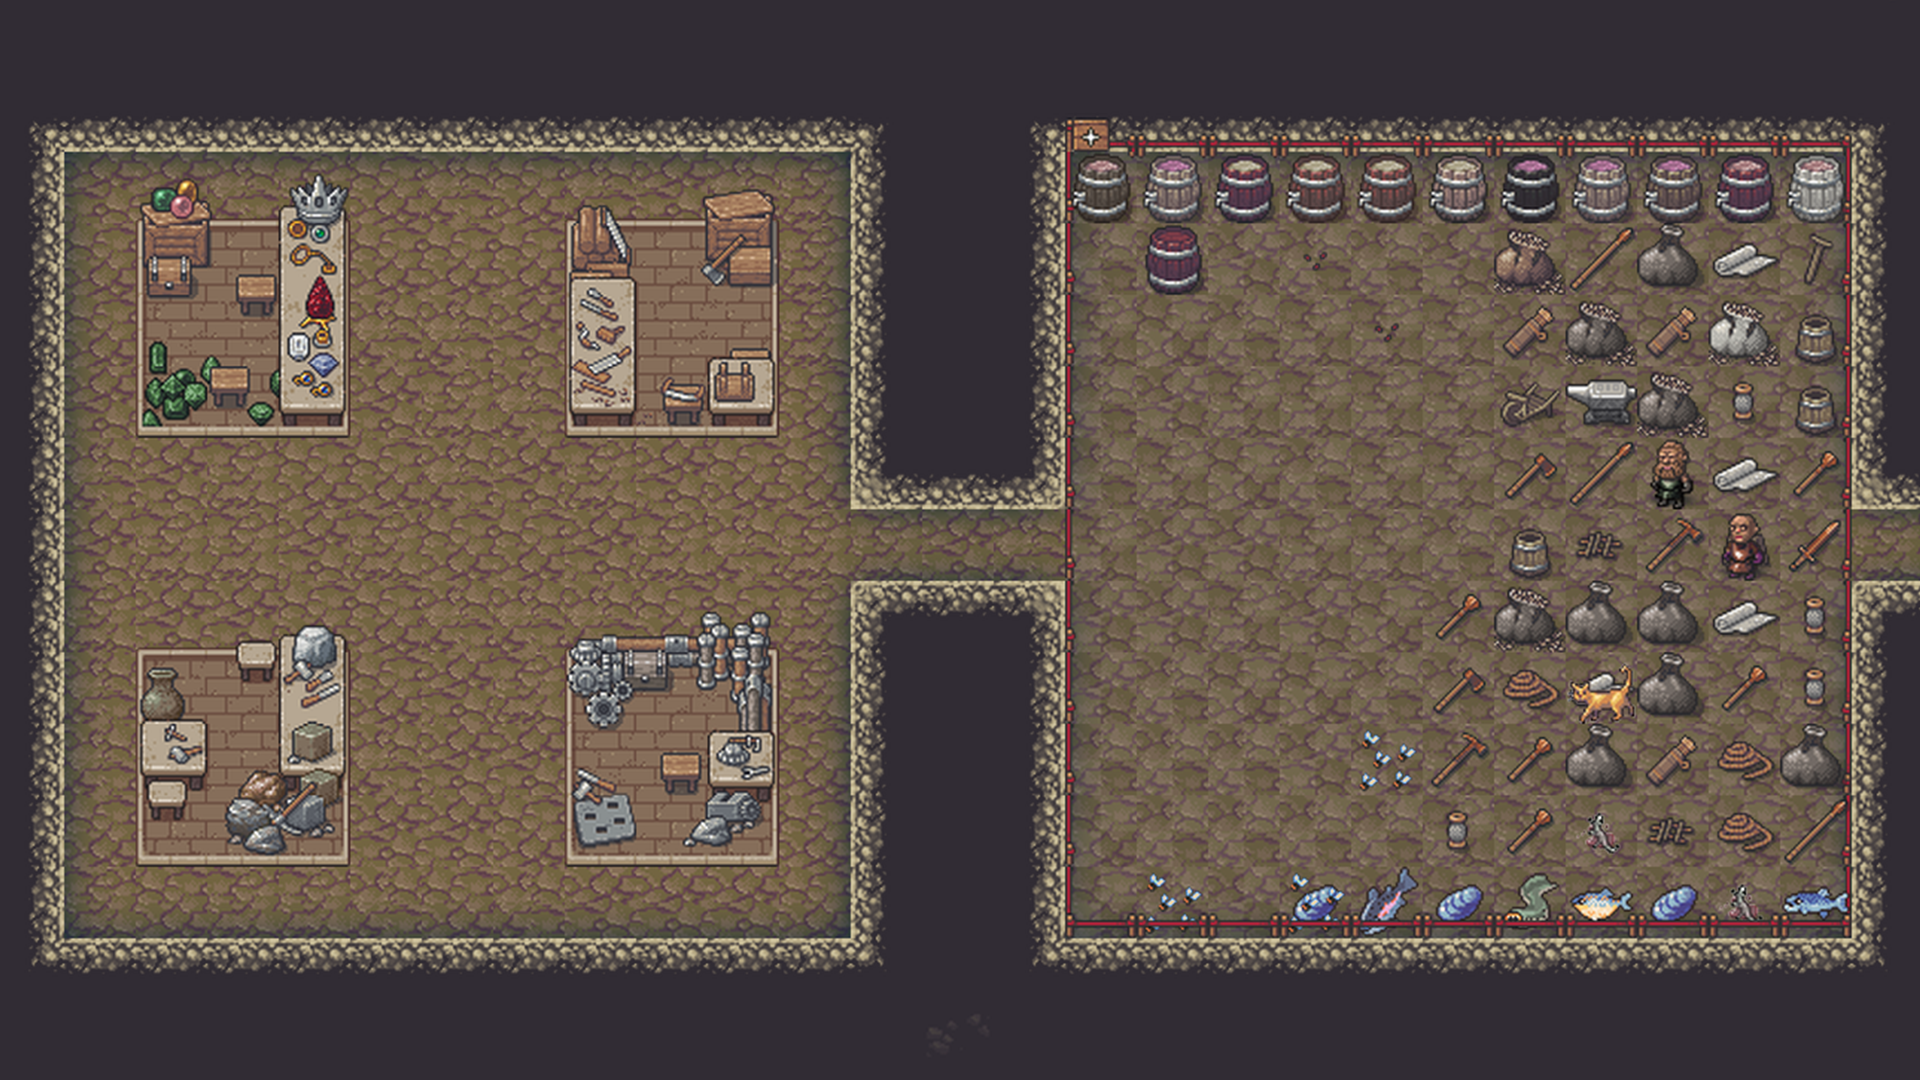 Dwarf Fortress screenshot showing two rooms, one with a stockpile and the other with four workshops.